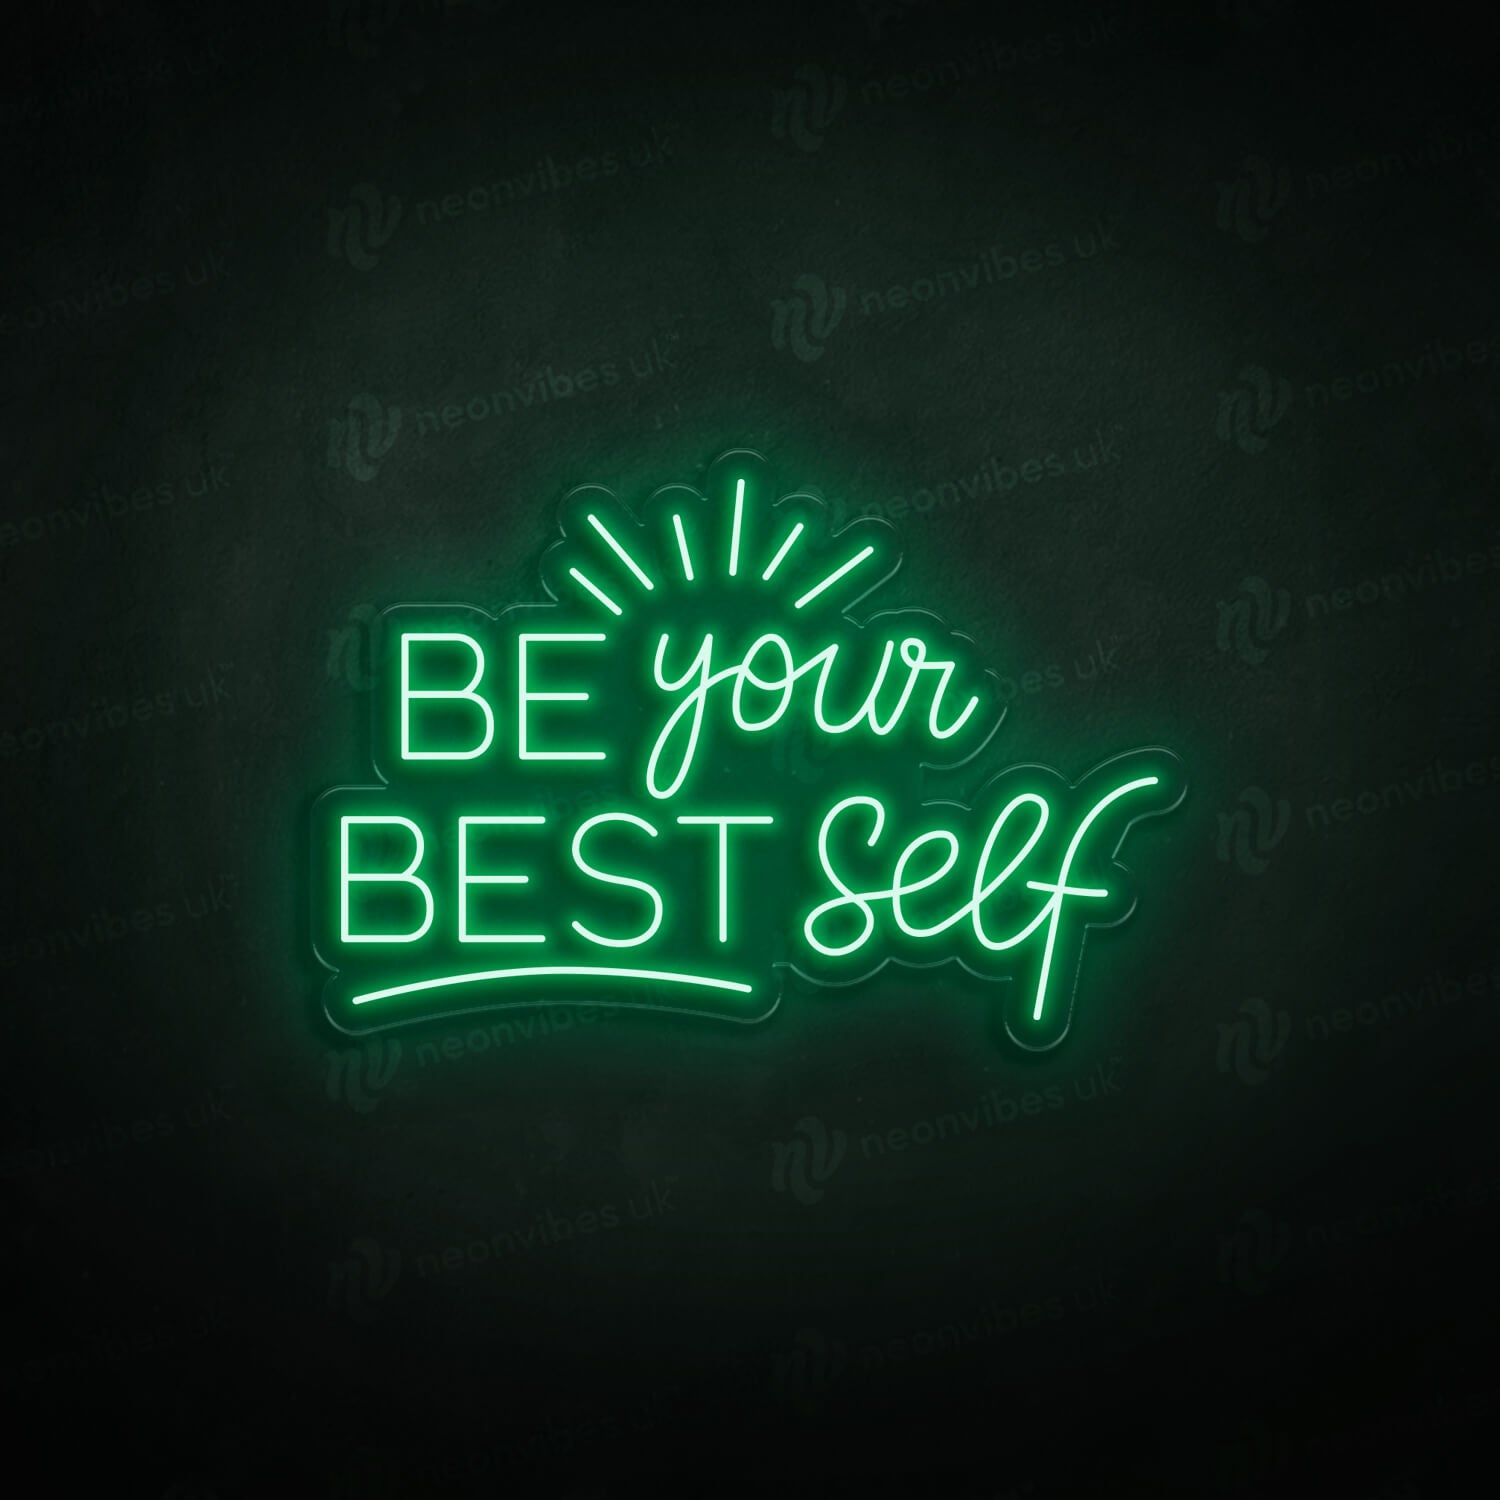 Be your best self neon sign